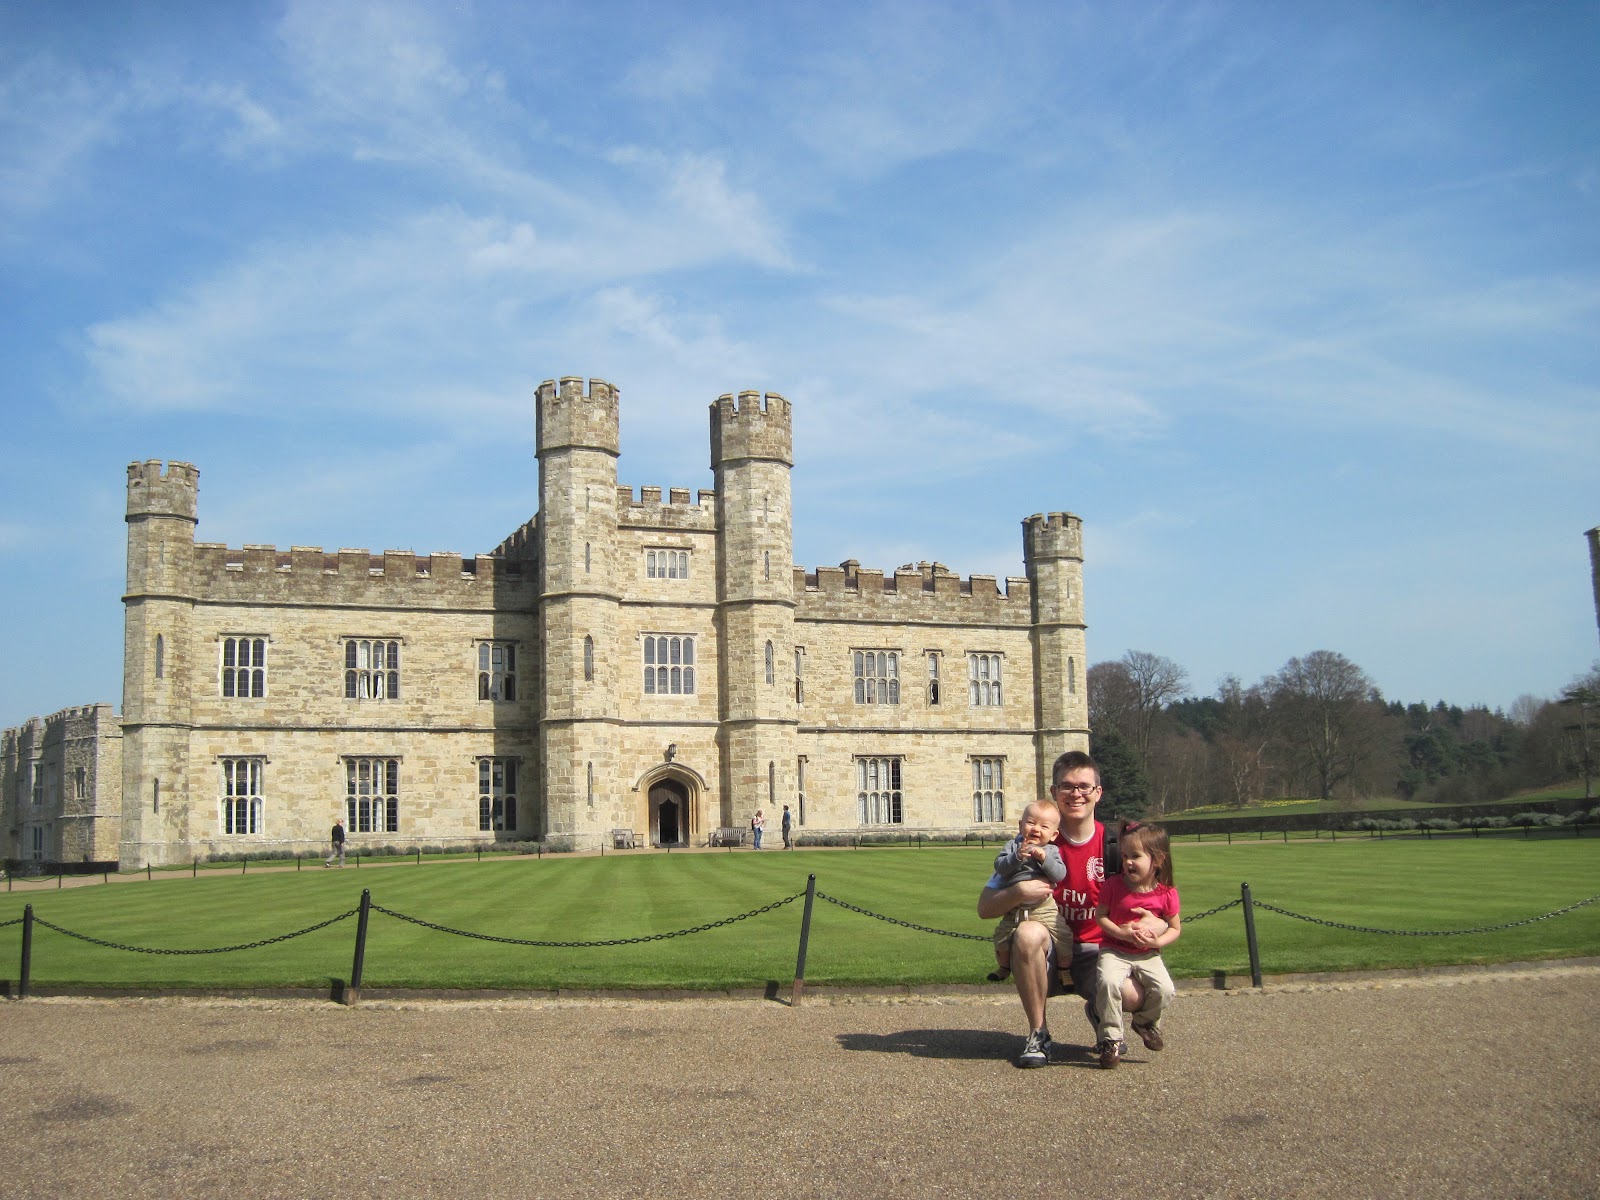 Glad to be in the UK: Leeds Castle Part 1